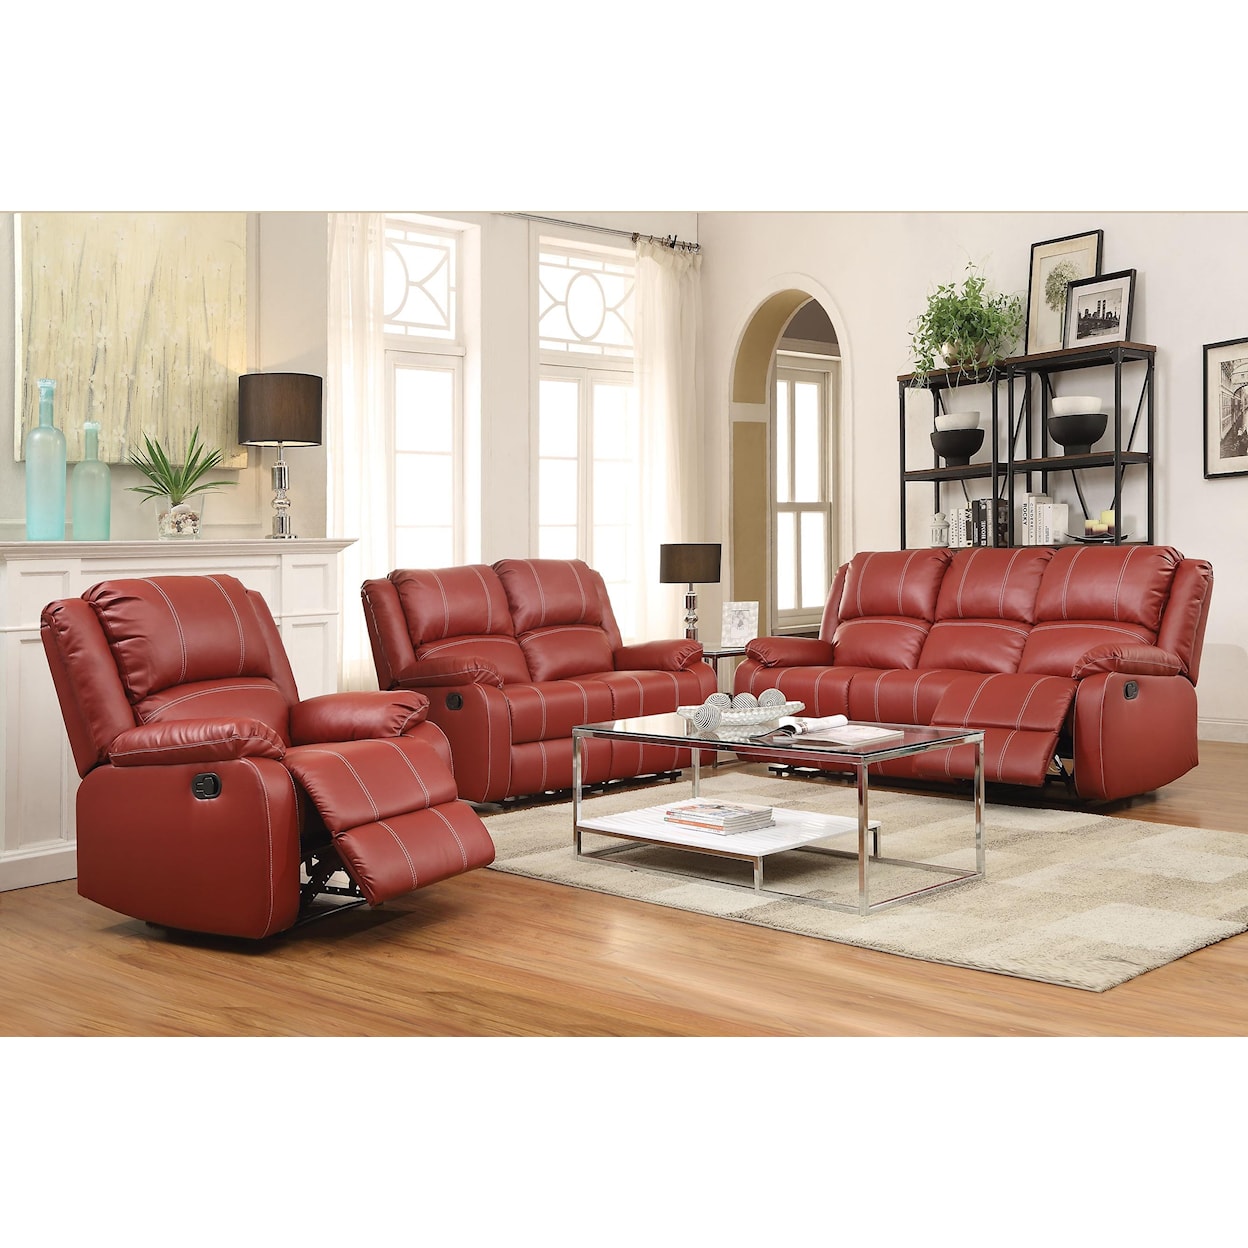 Acme Furniture Zuriel Reclining Living Room Group